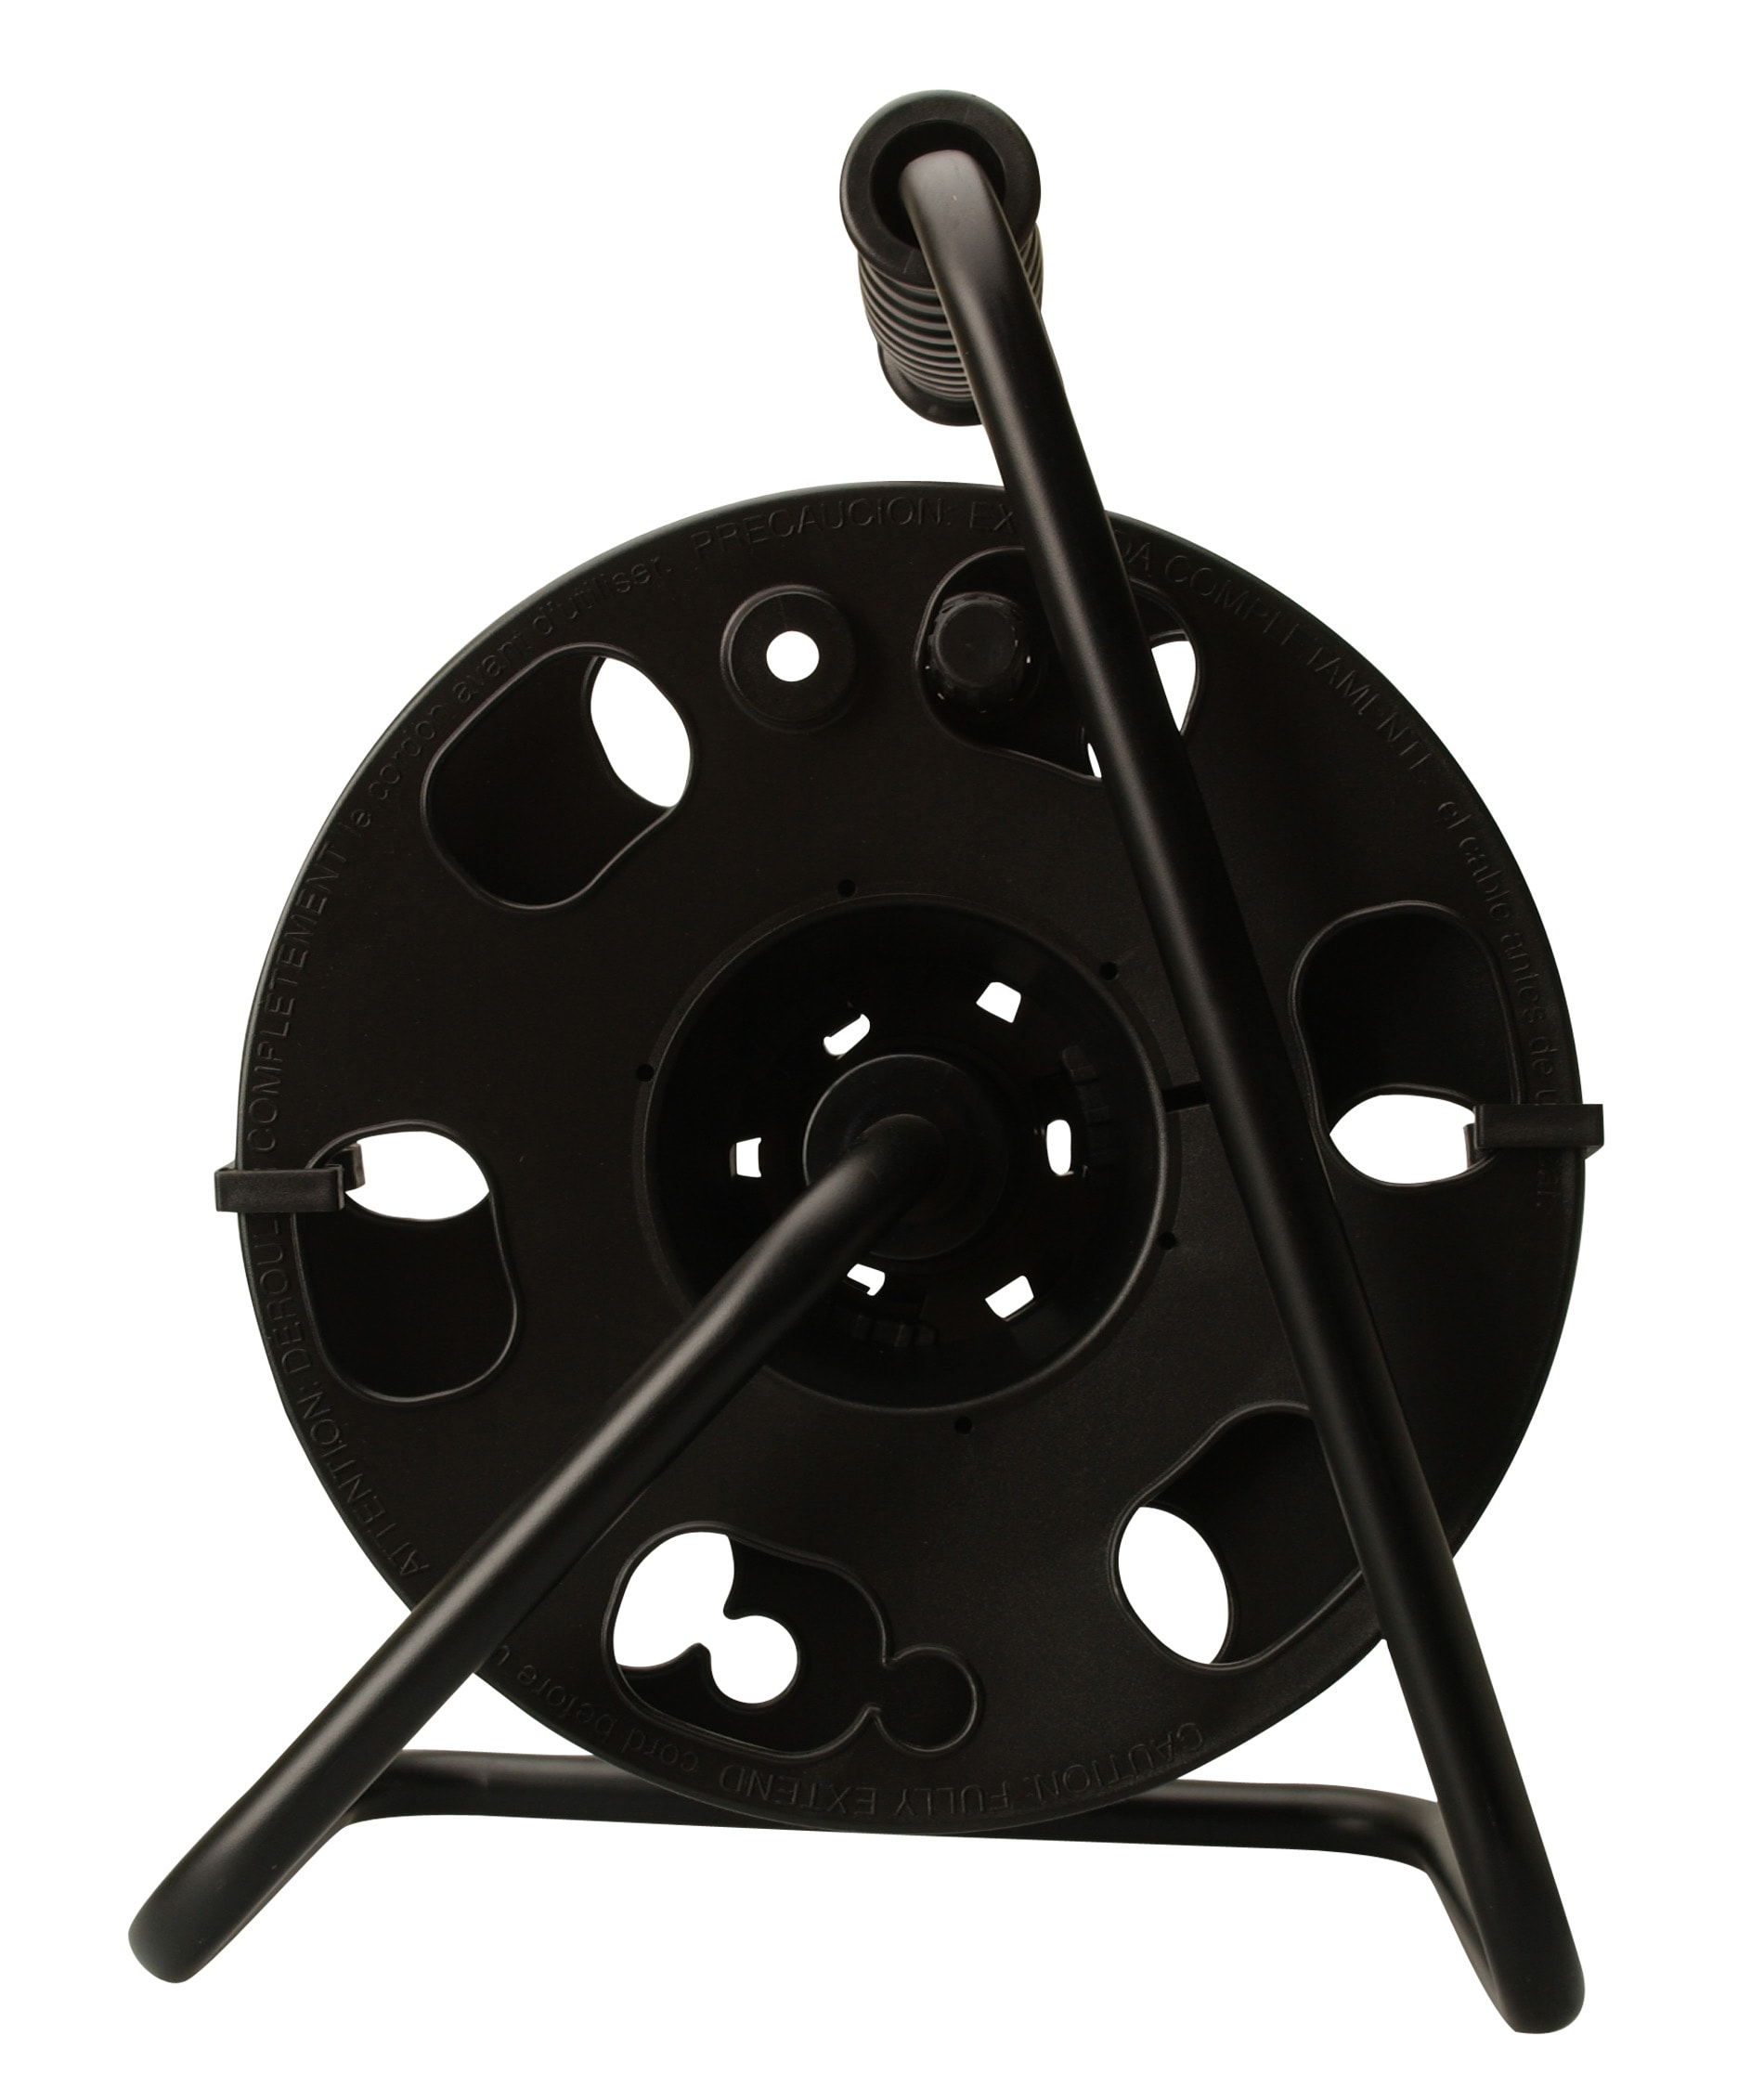 Woods Cord Reel with Metal Stand - Black 22849